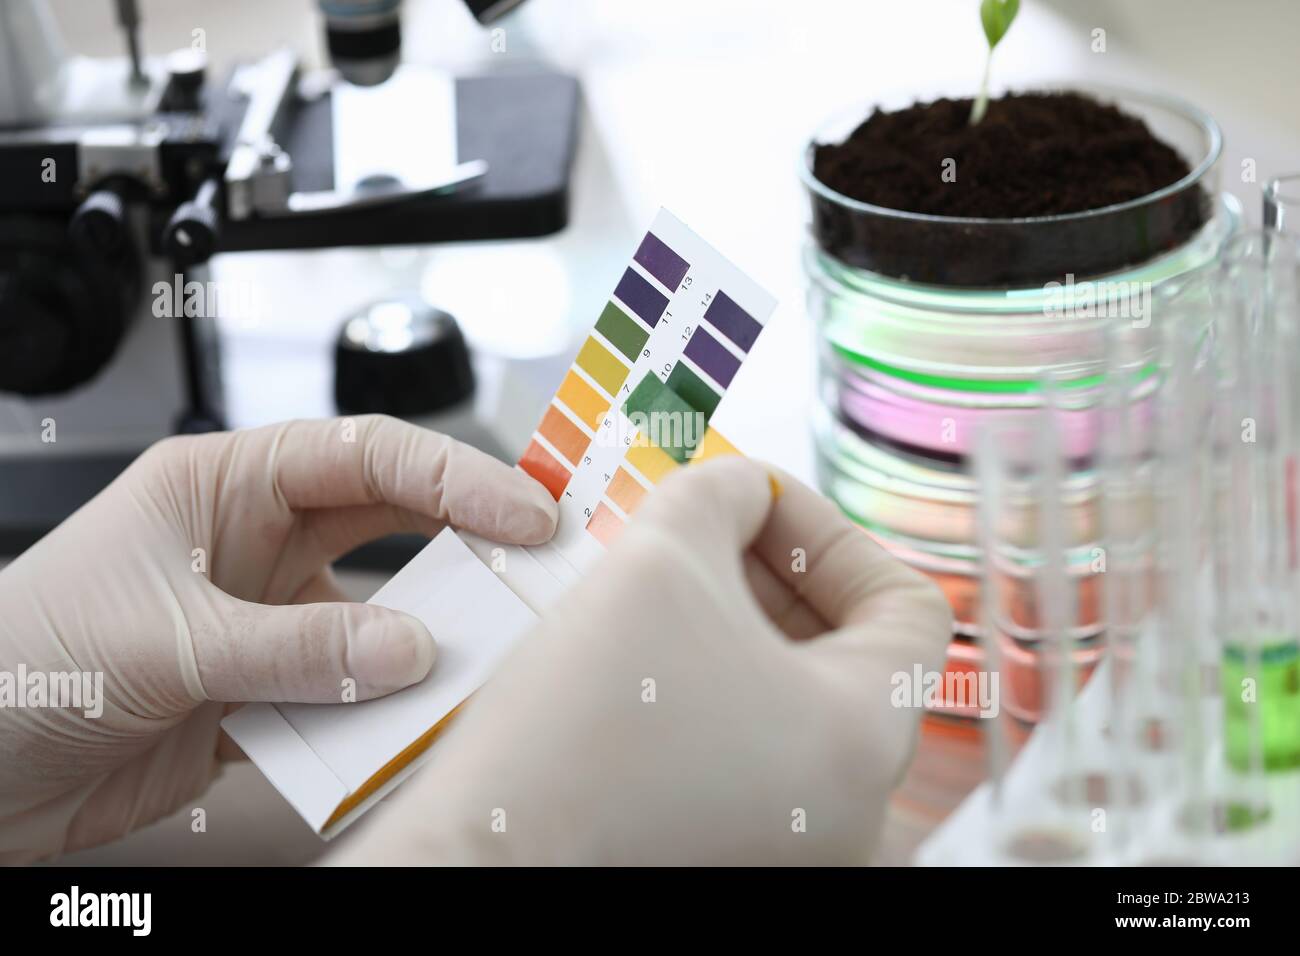 Gloved hands holding paper to test soil acidity Stock Photo